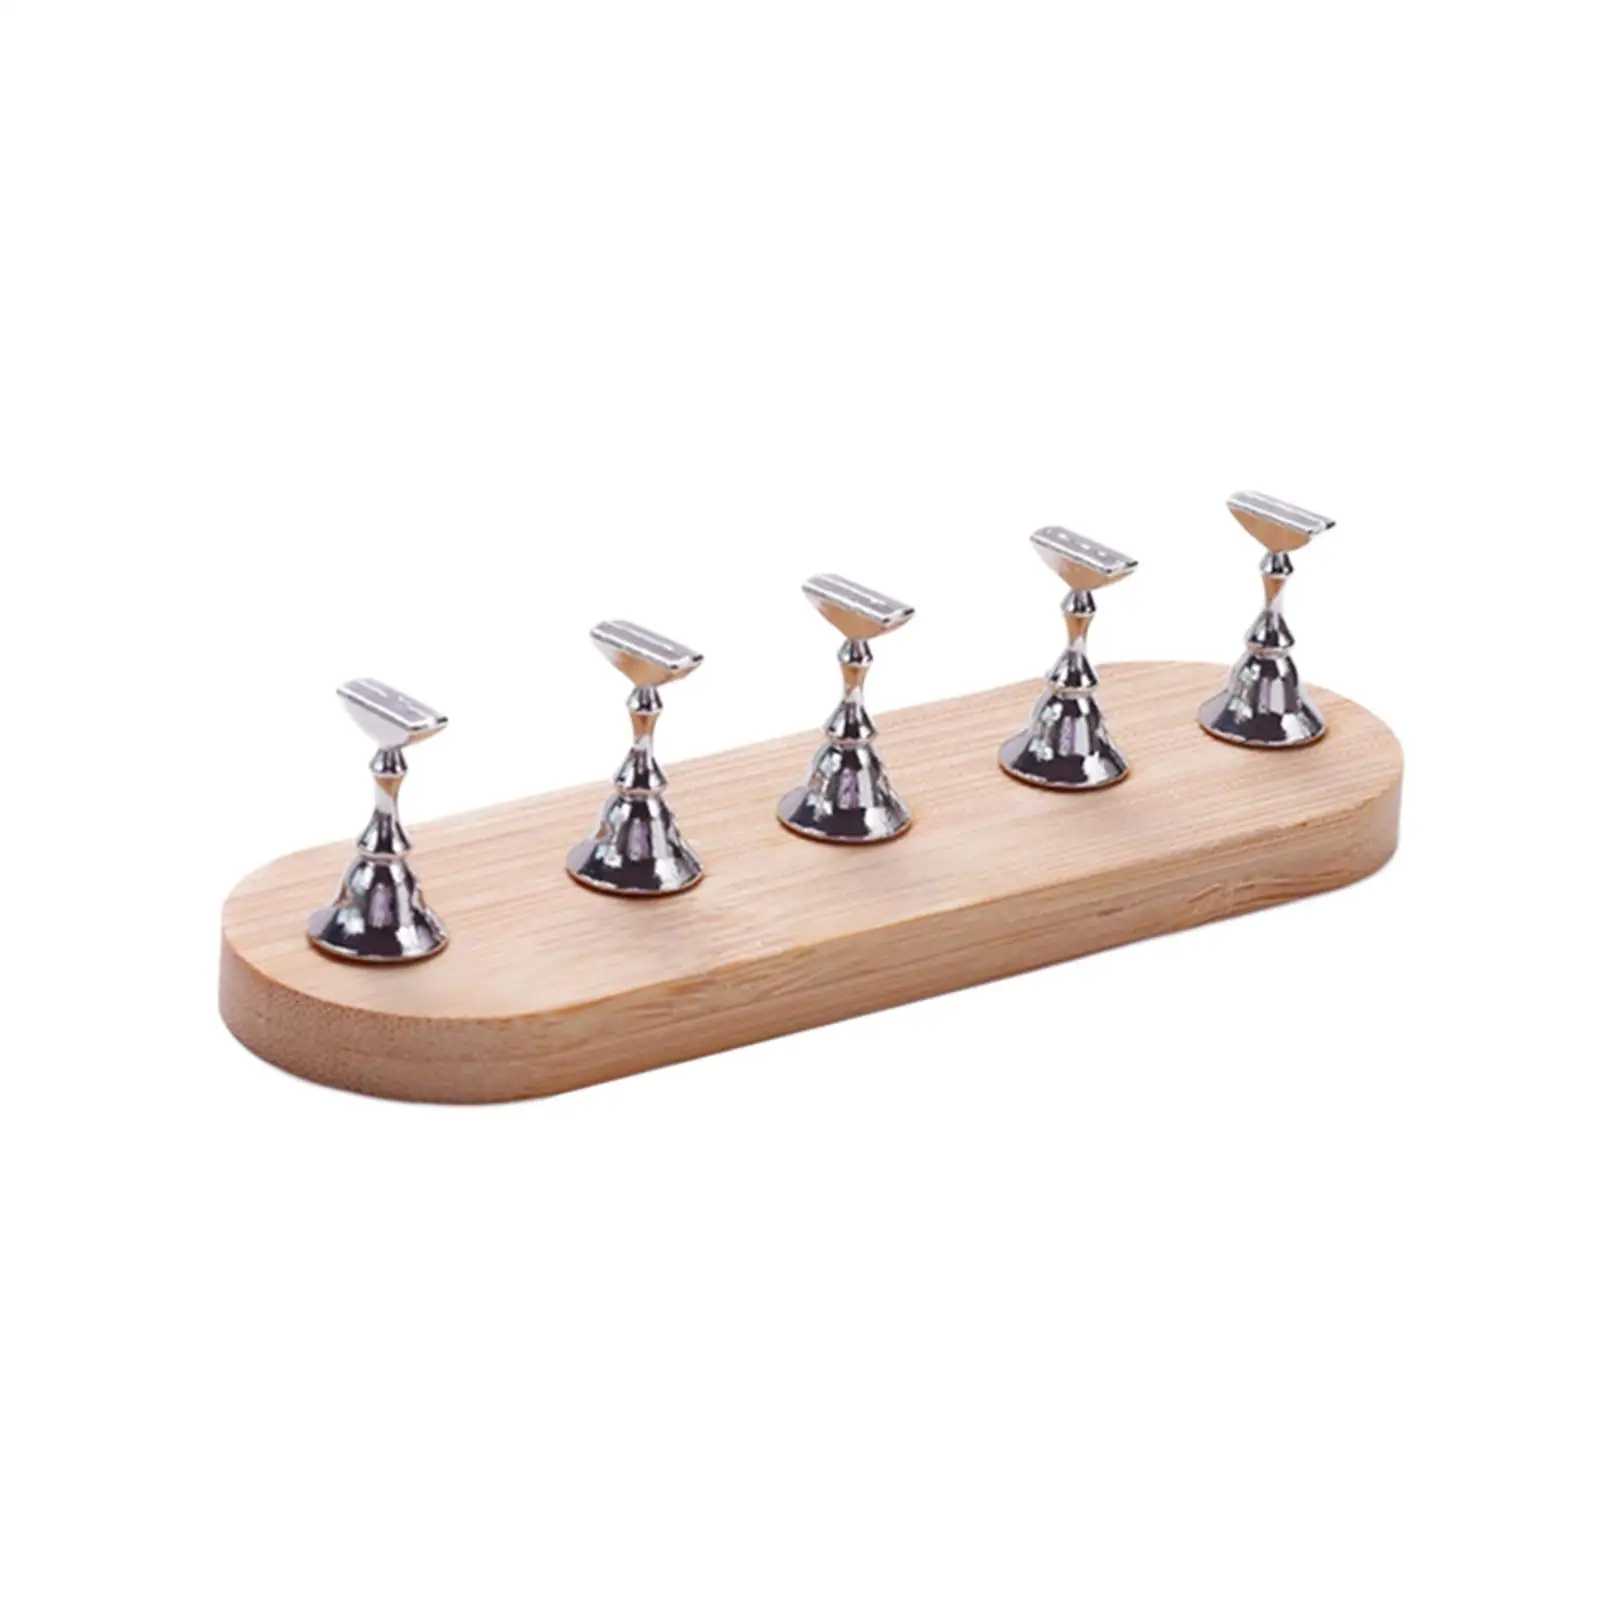 Nail Stand Durable Reusable Accessories Nail Tip Holders Nail Showing Shelf for Beginner Training Practice Makeup Home Salon DIY